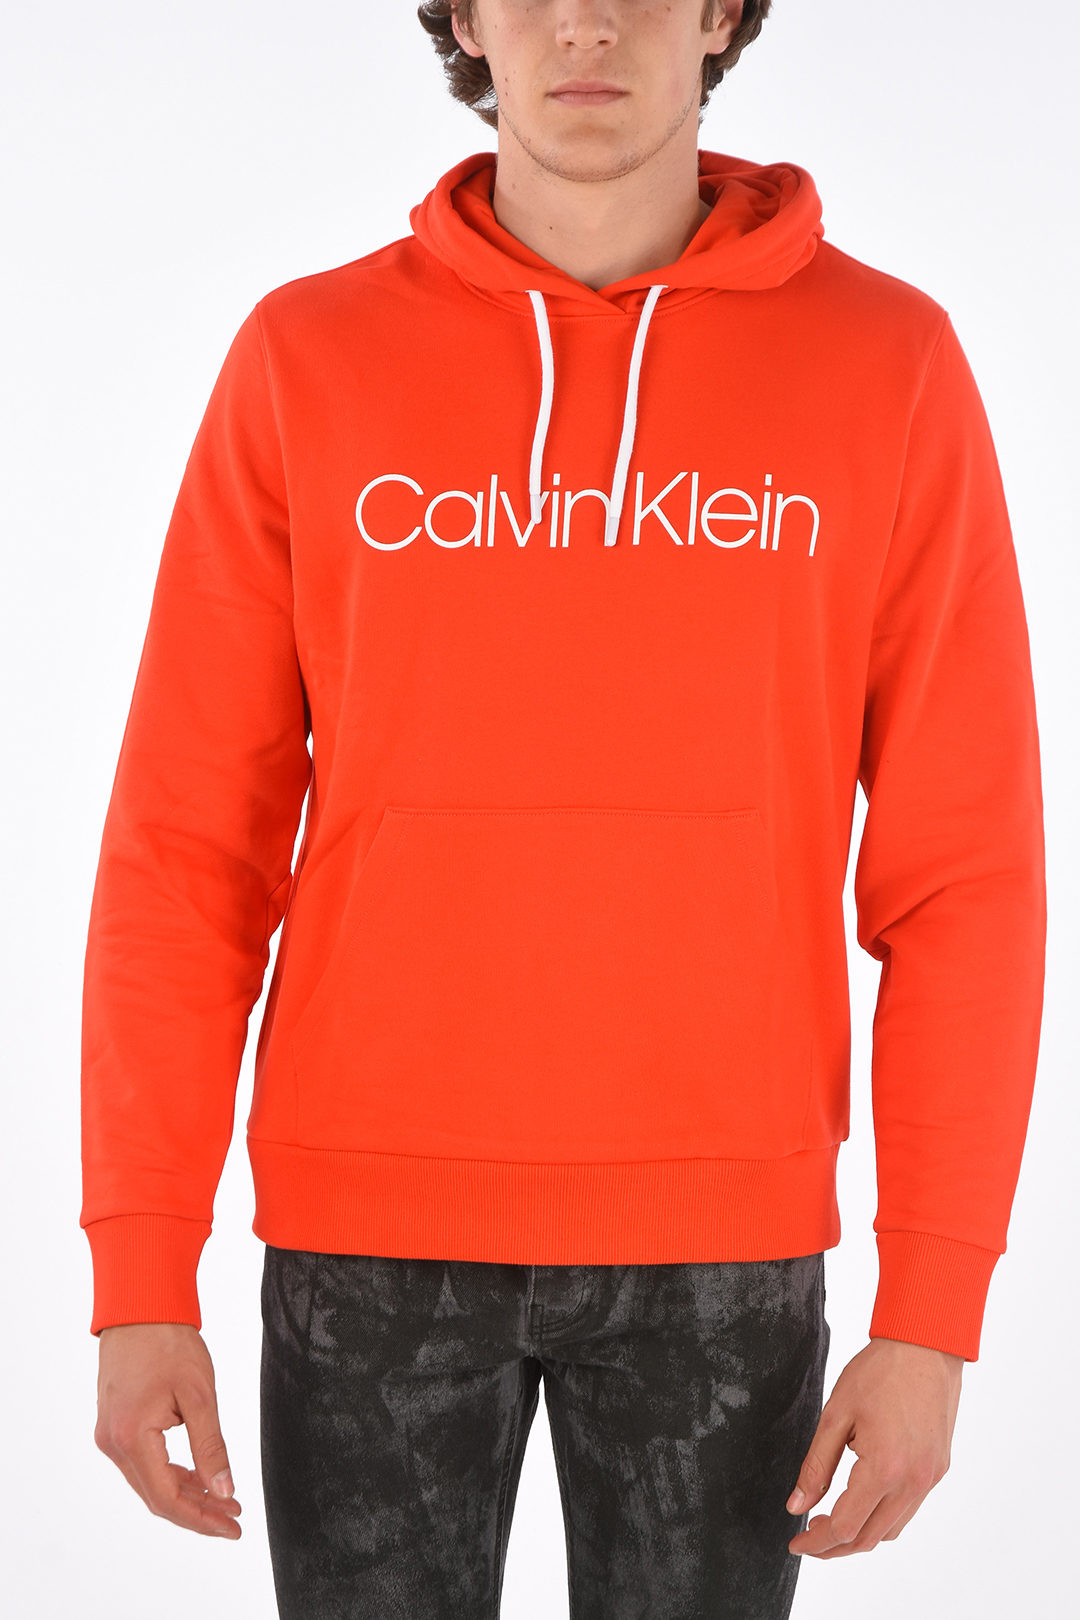 Calvin Klein hoodie sweatshirt with maxi patch pocket men - Glamood Outlet